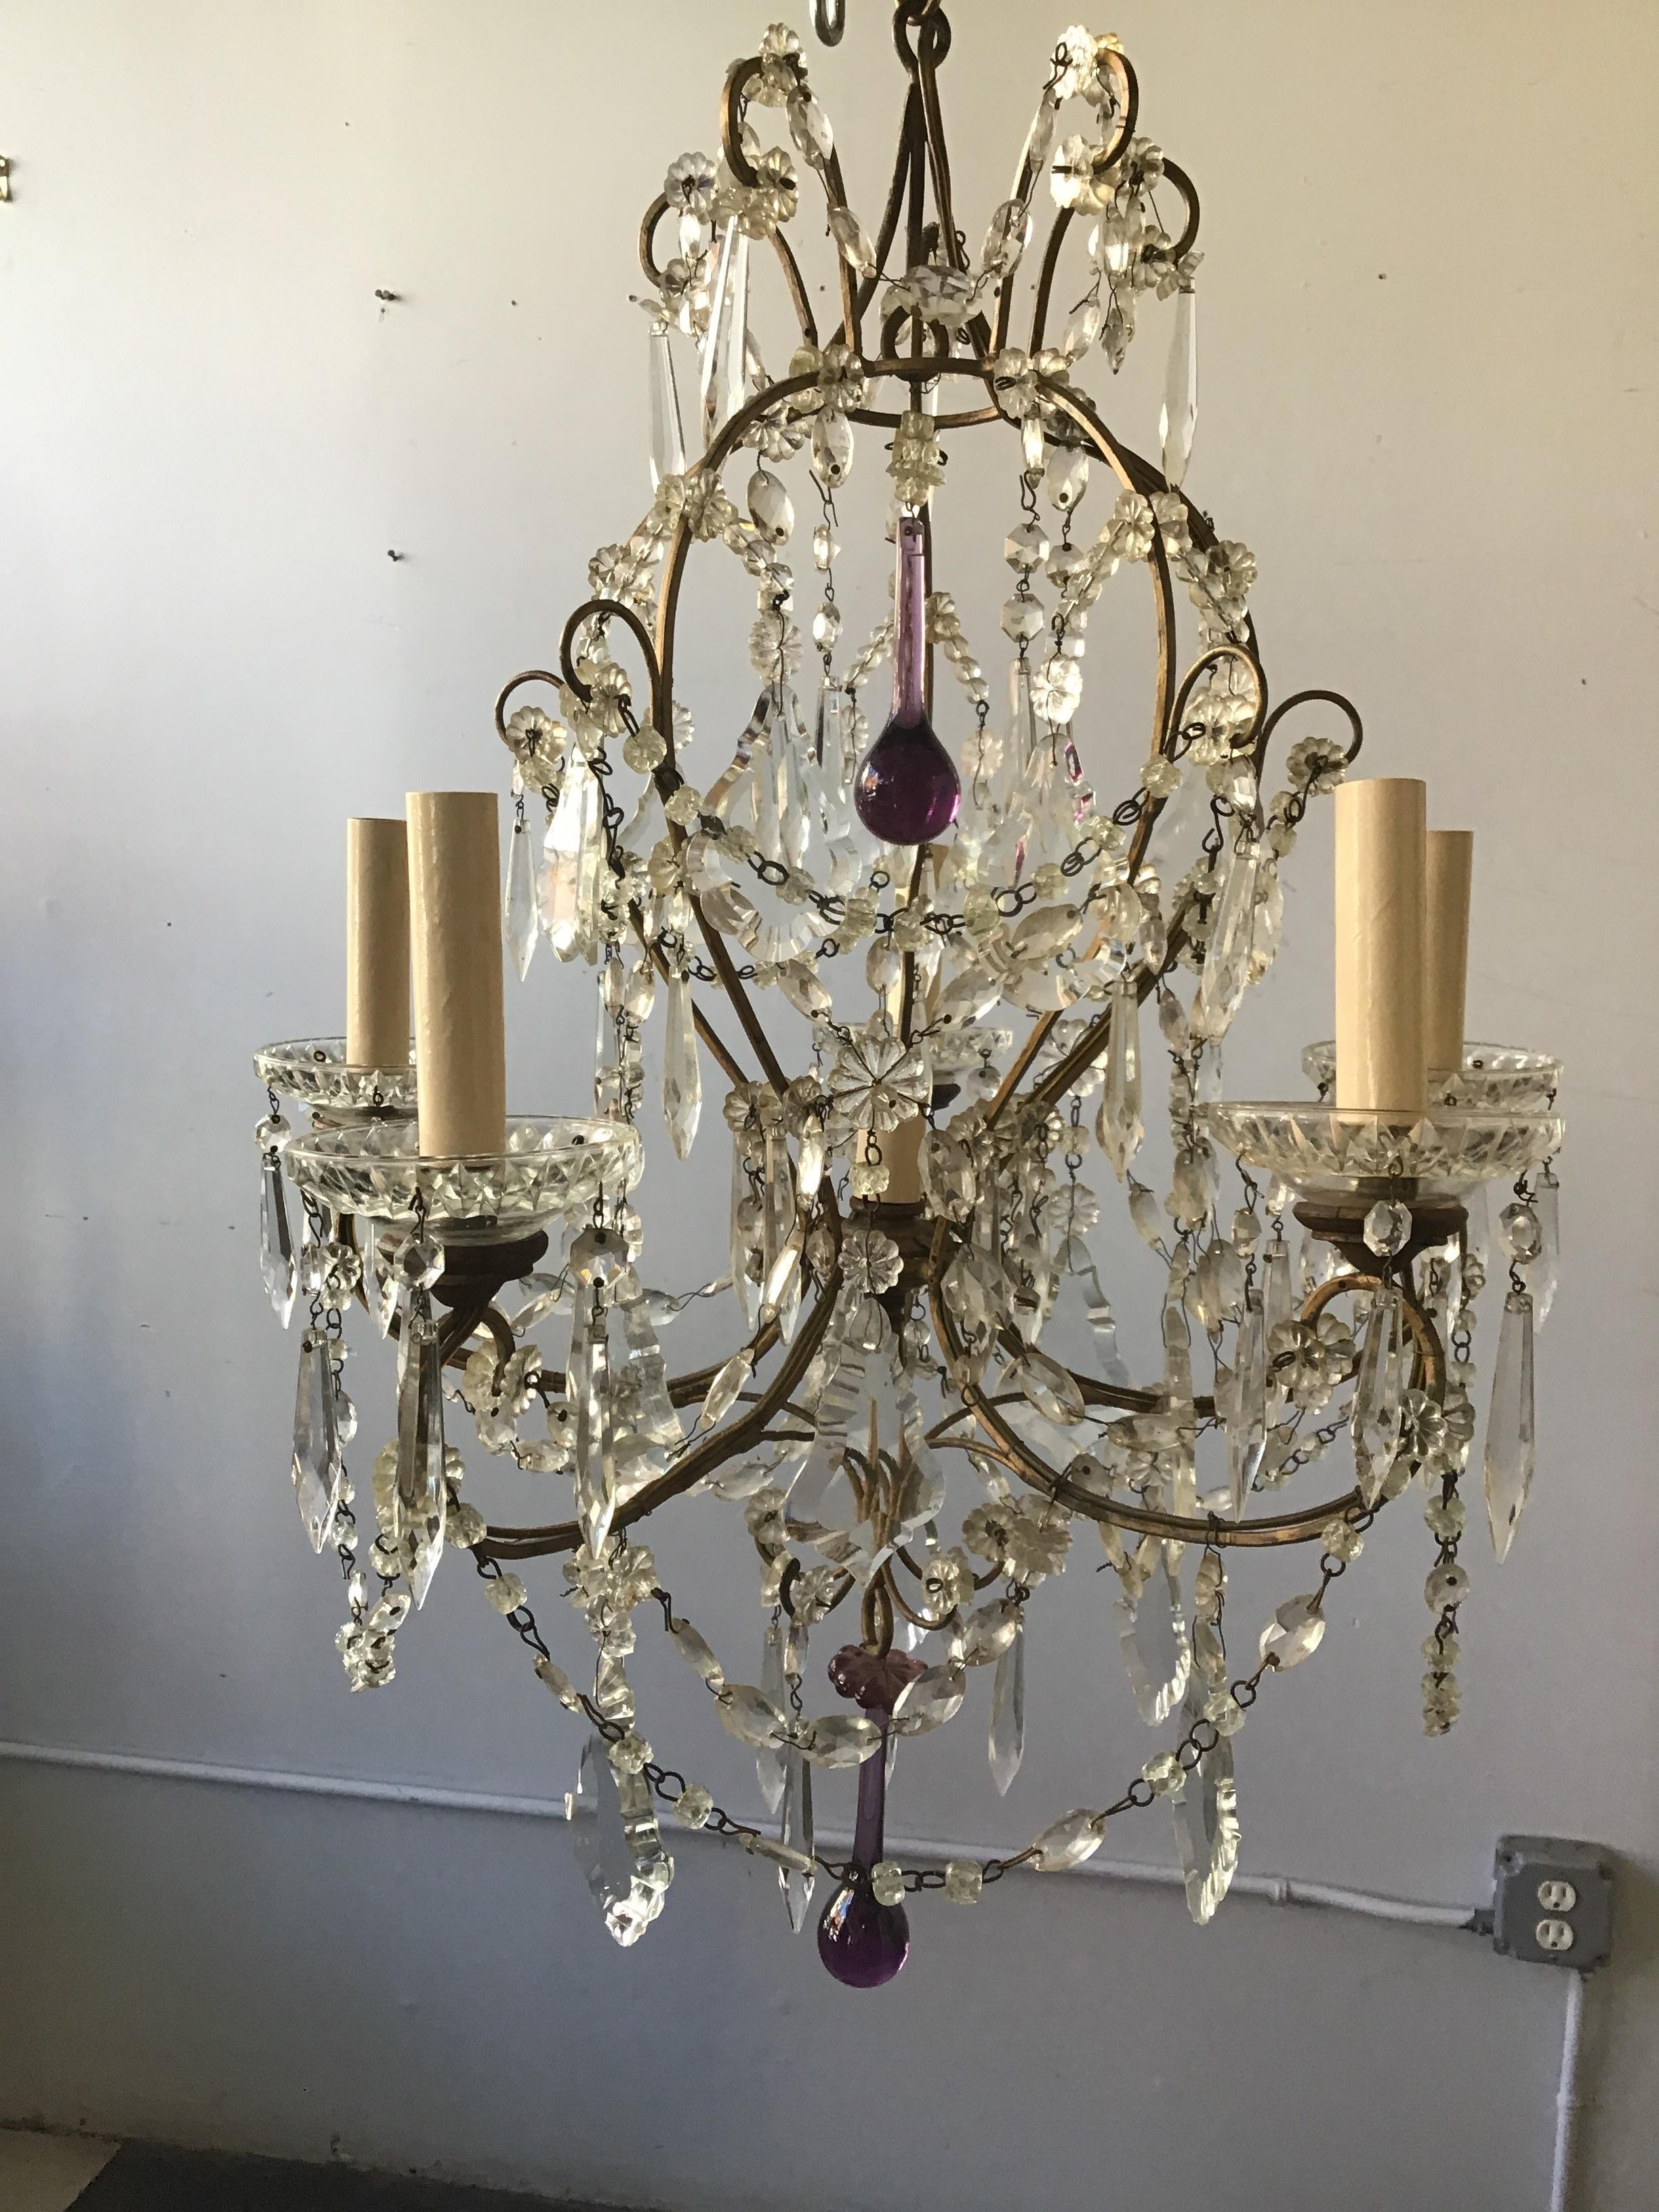 1960s Italian crystal chandelier. Iron frame. A few crystals missing.